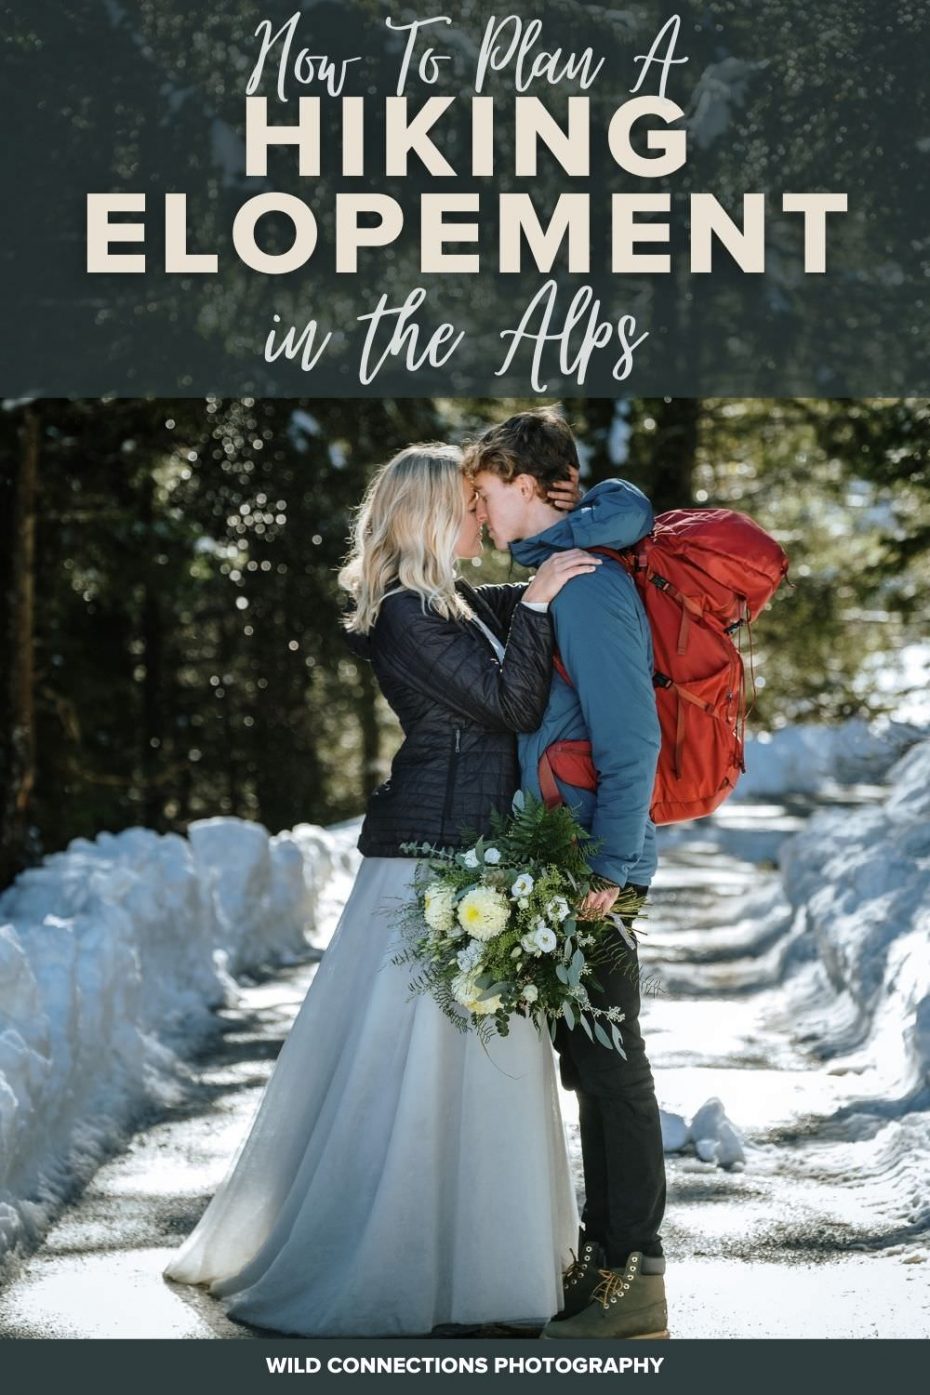 How to plan a hiking elopement in the Alps Pinterest pin